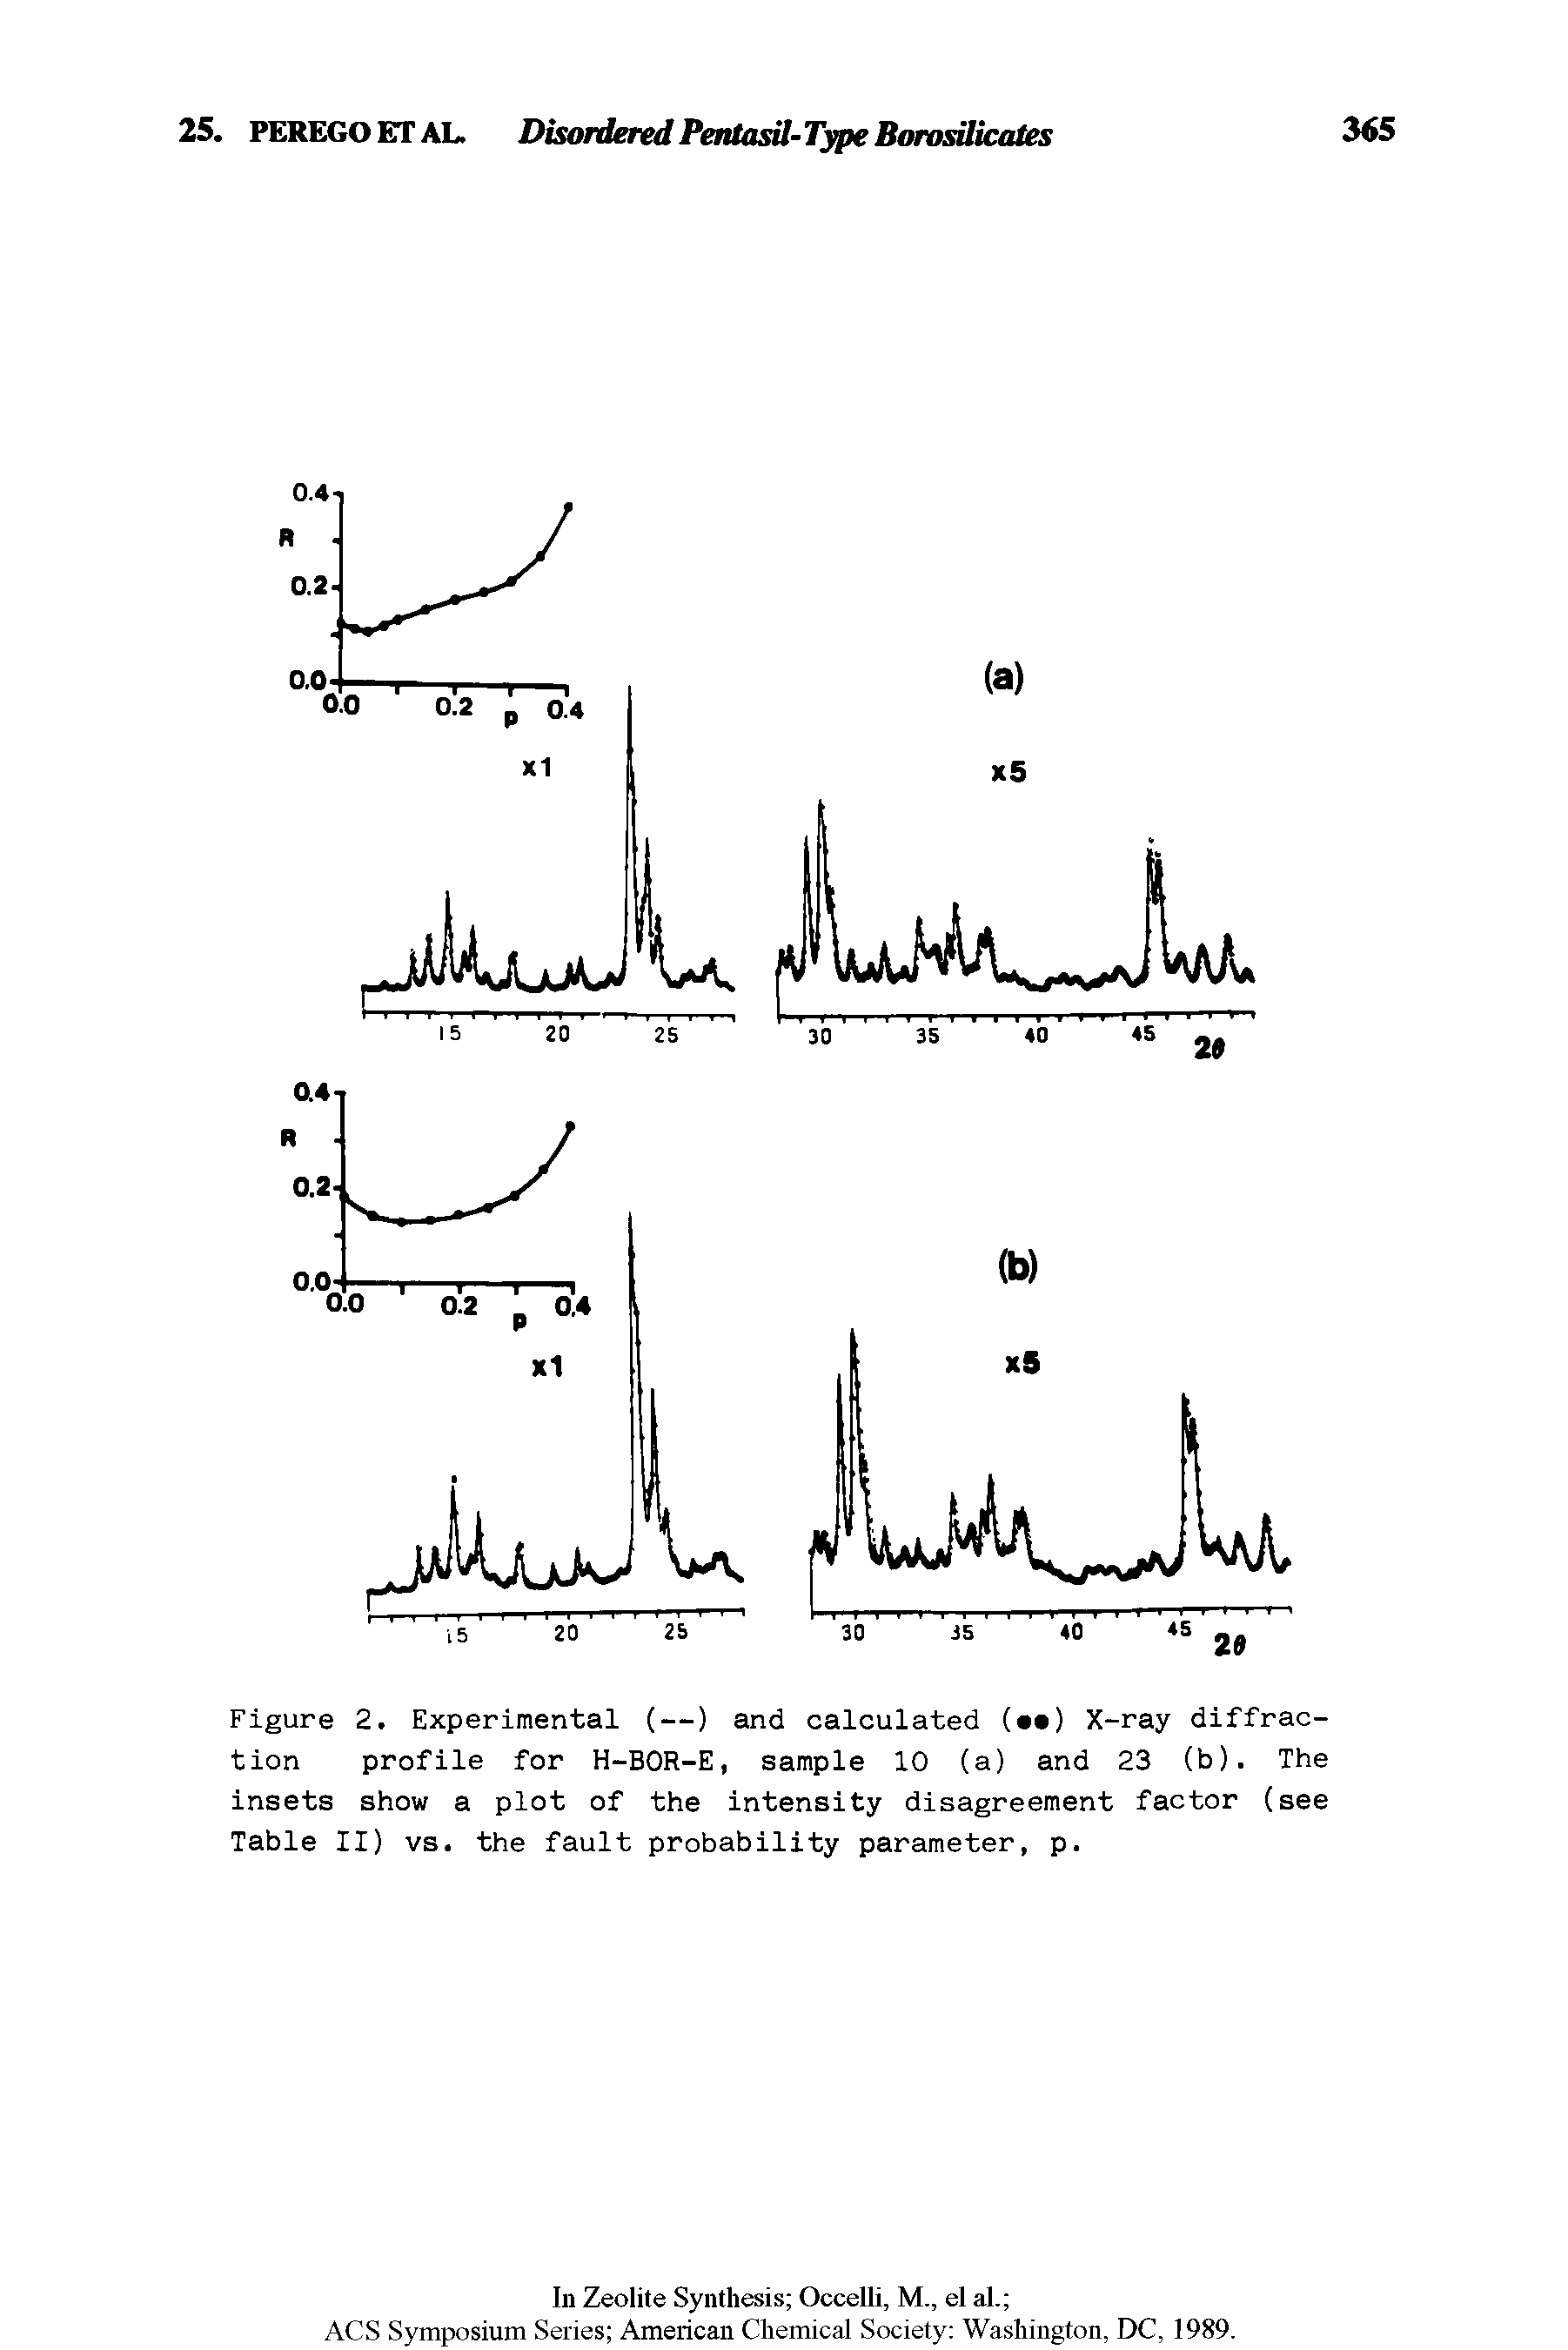 Figure 2. Experimental (—) and calculated ( ) X-ray diffraction profile for H-BOR-E, sample 10 (a) and 23 (b). The insets show a plot of the intensity disagreement factor (see Table II) vs. the fault probability parameter, p.